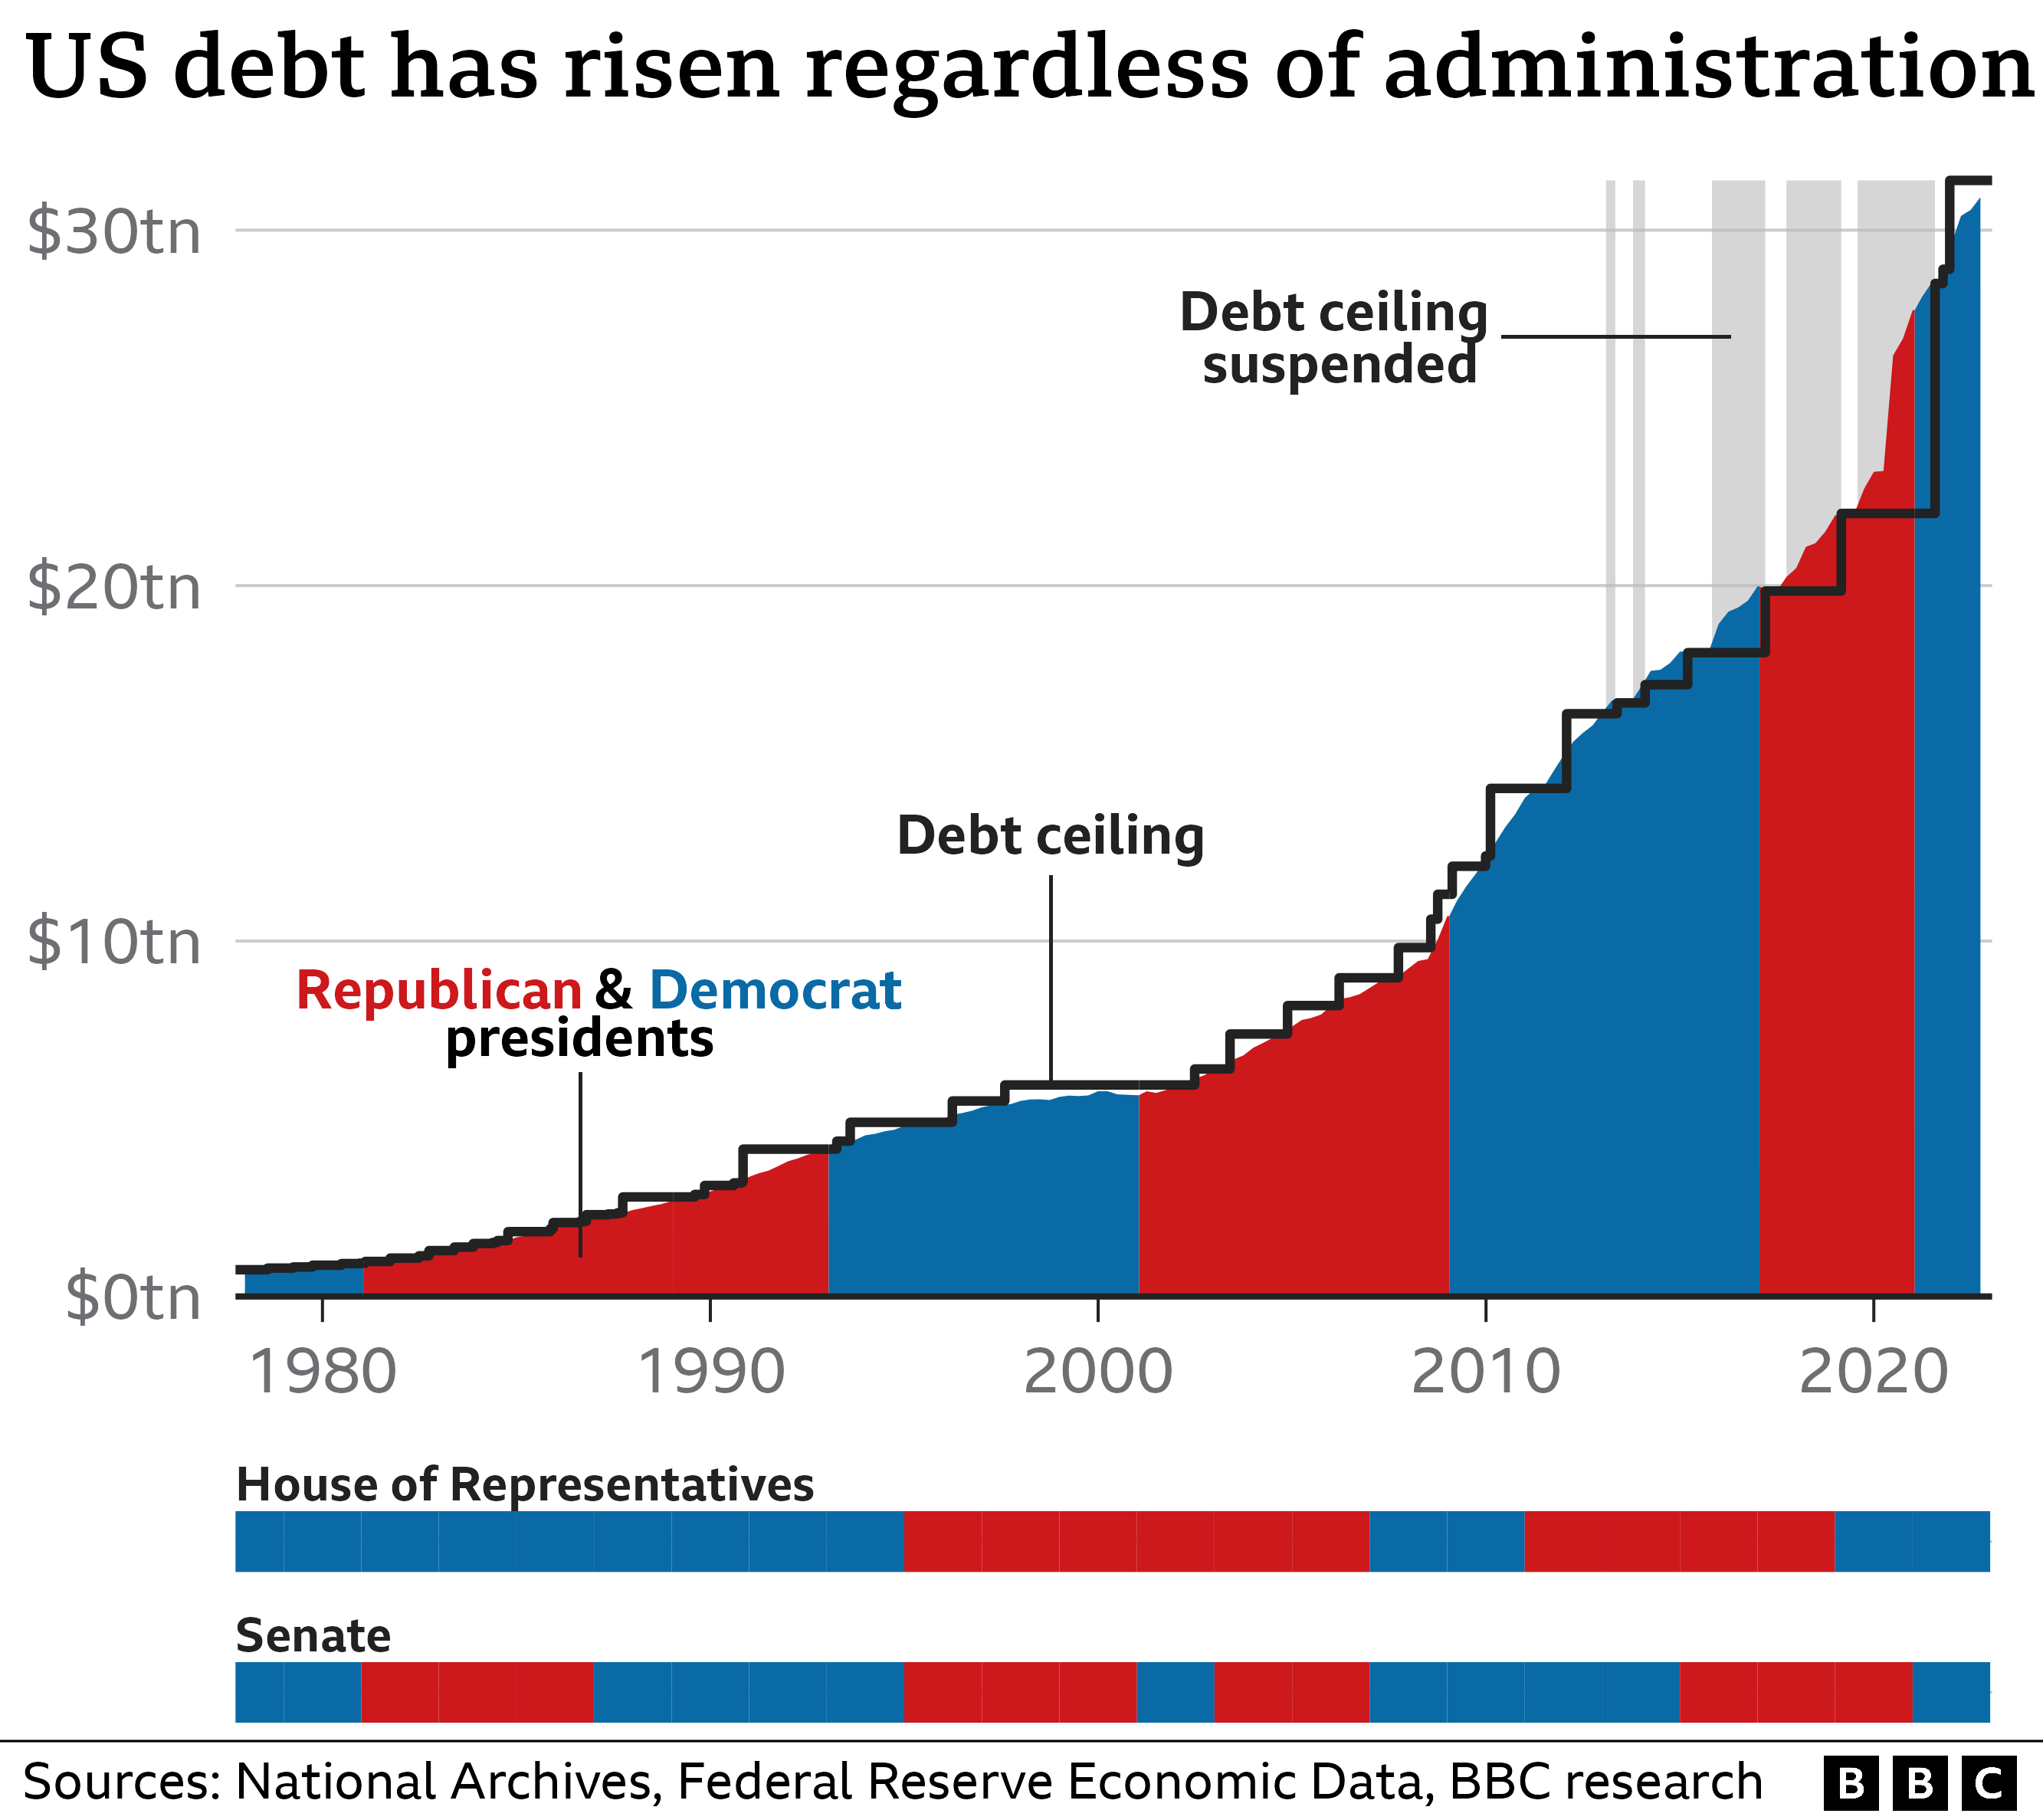 Graphic shows rising US debt